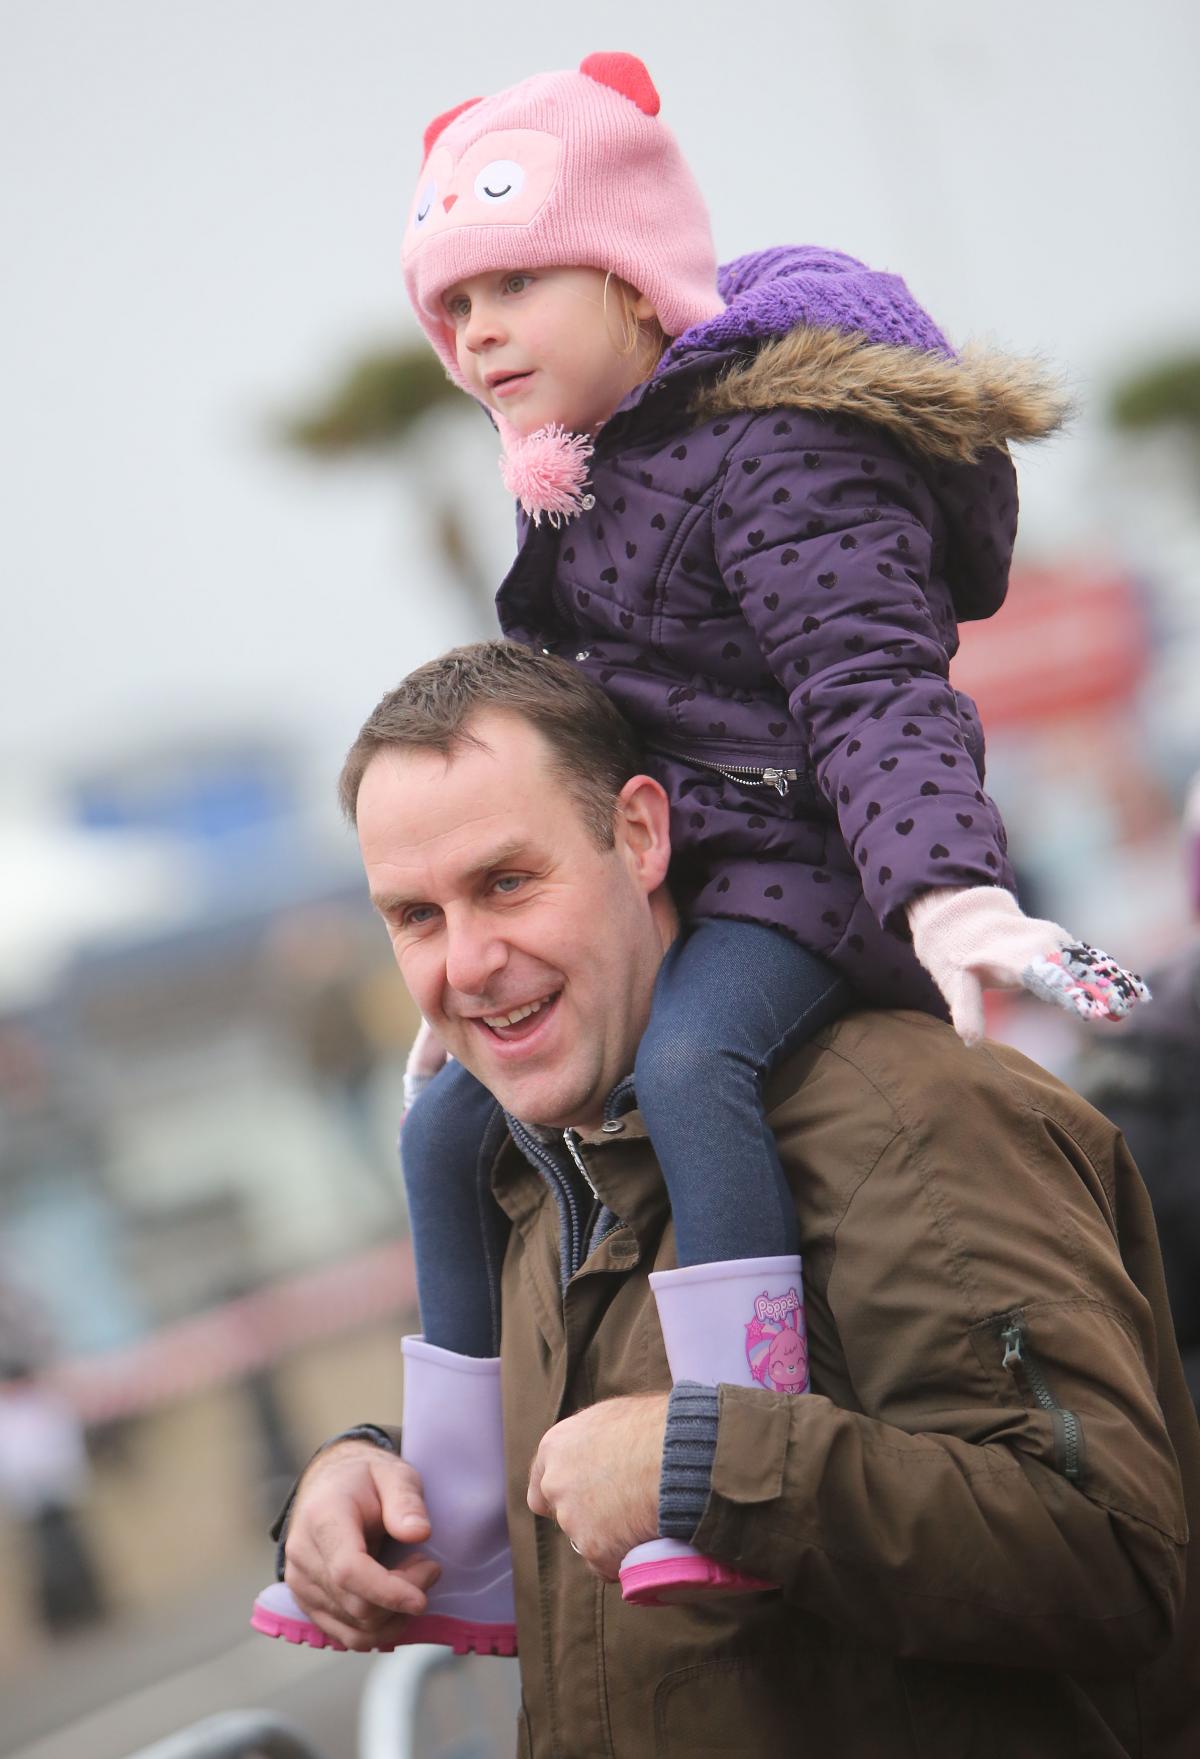 All our images from Poole's Santa on the Quay event, by Corin Messer